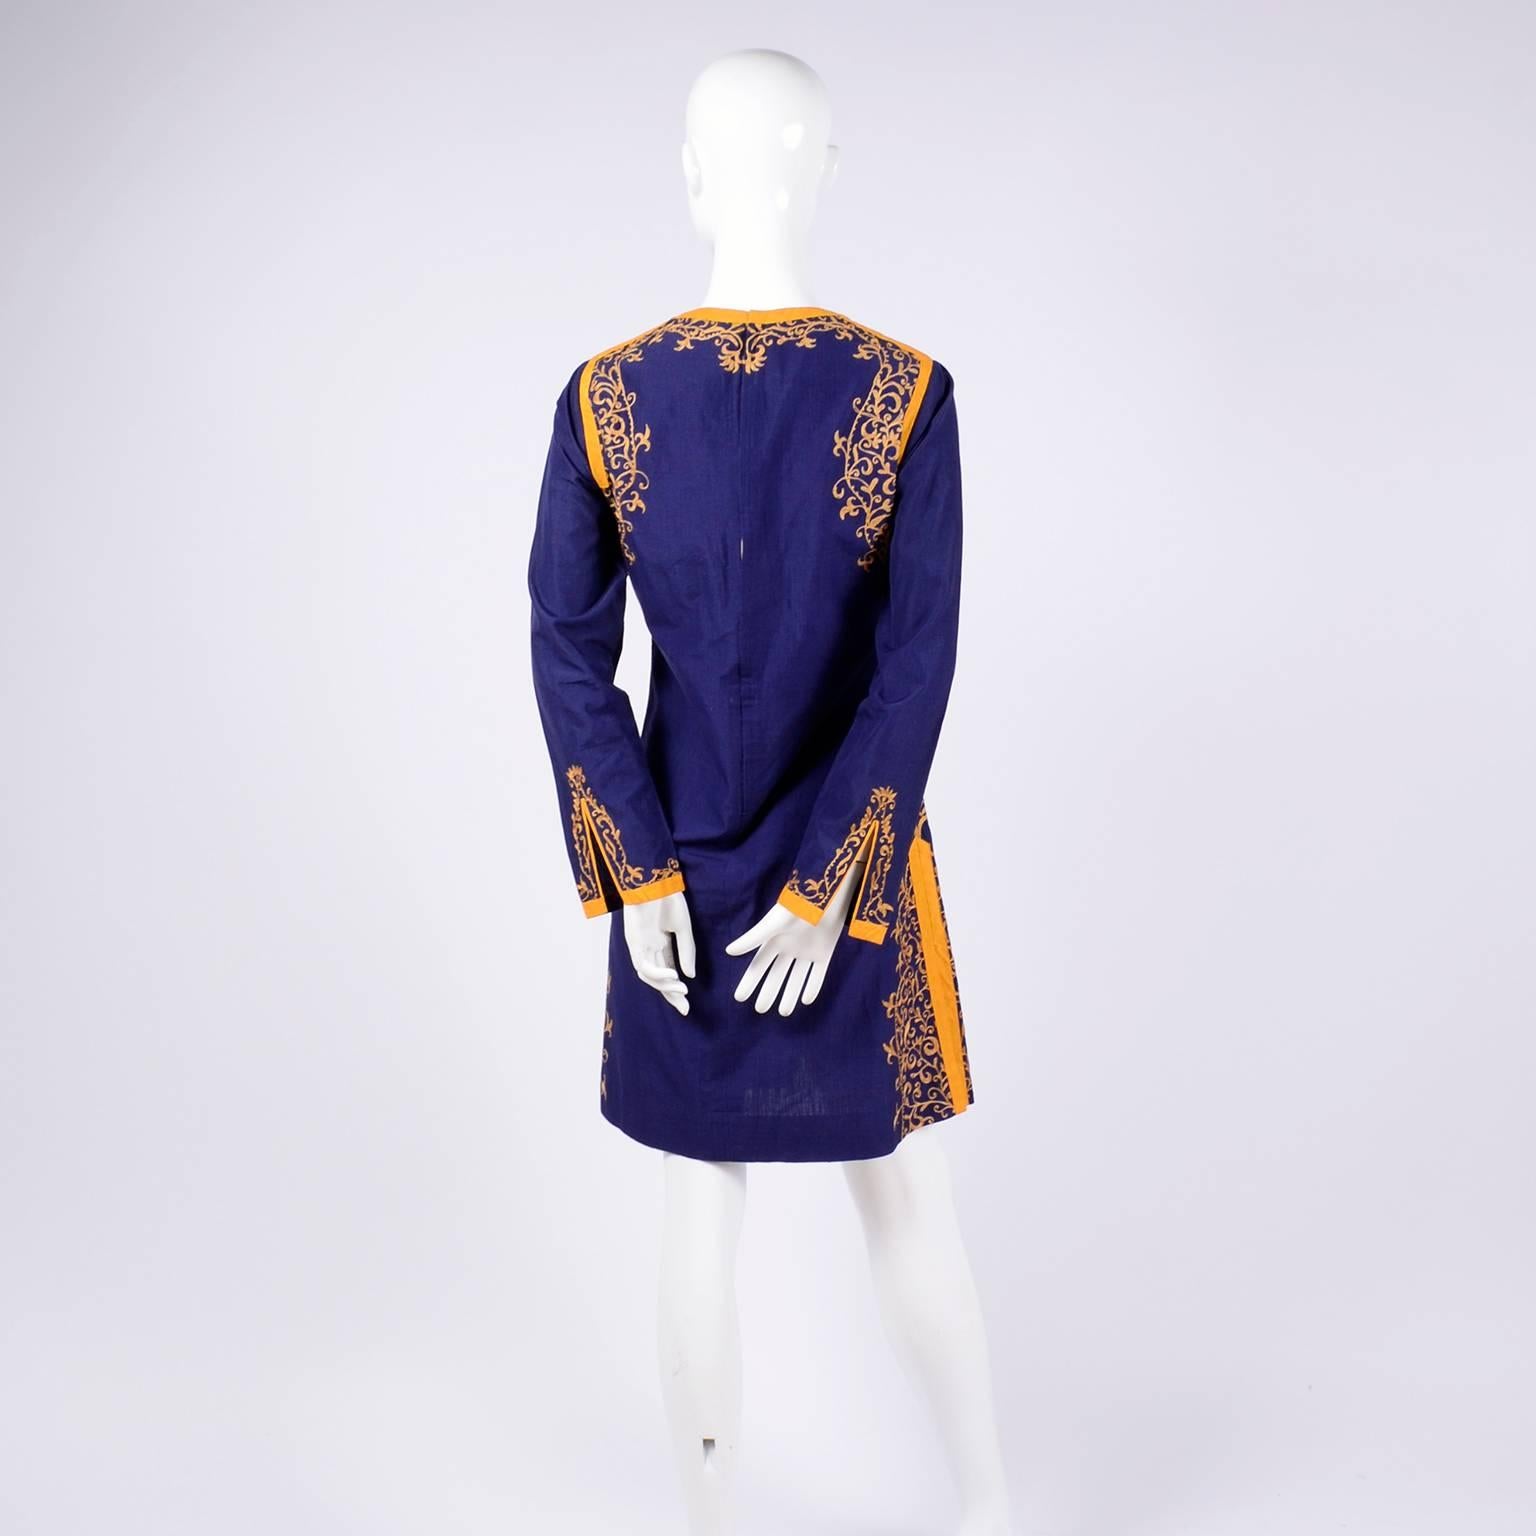 Aananda Vintage Navy Blue Cotton Dress Tunic with Marigold Embroidery, 1960s  2